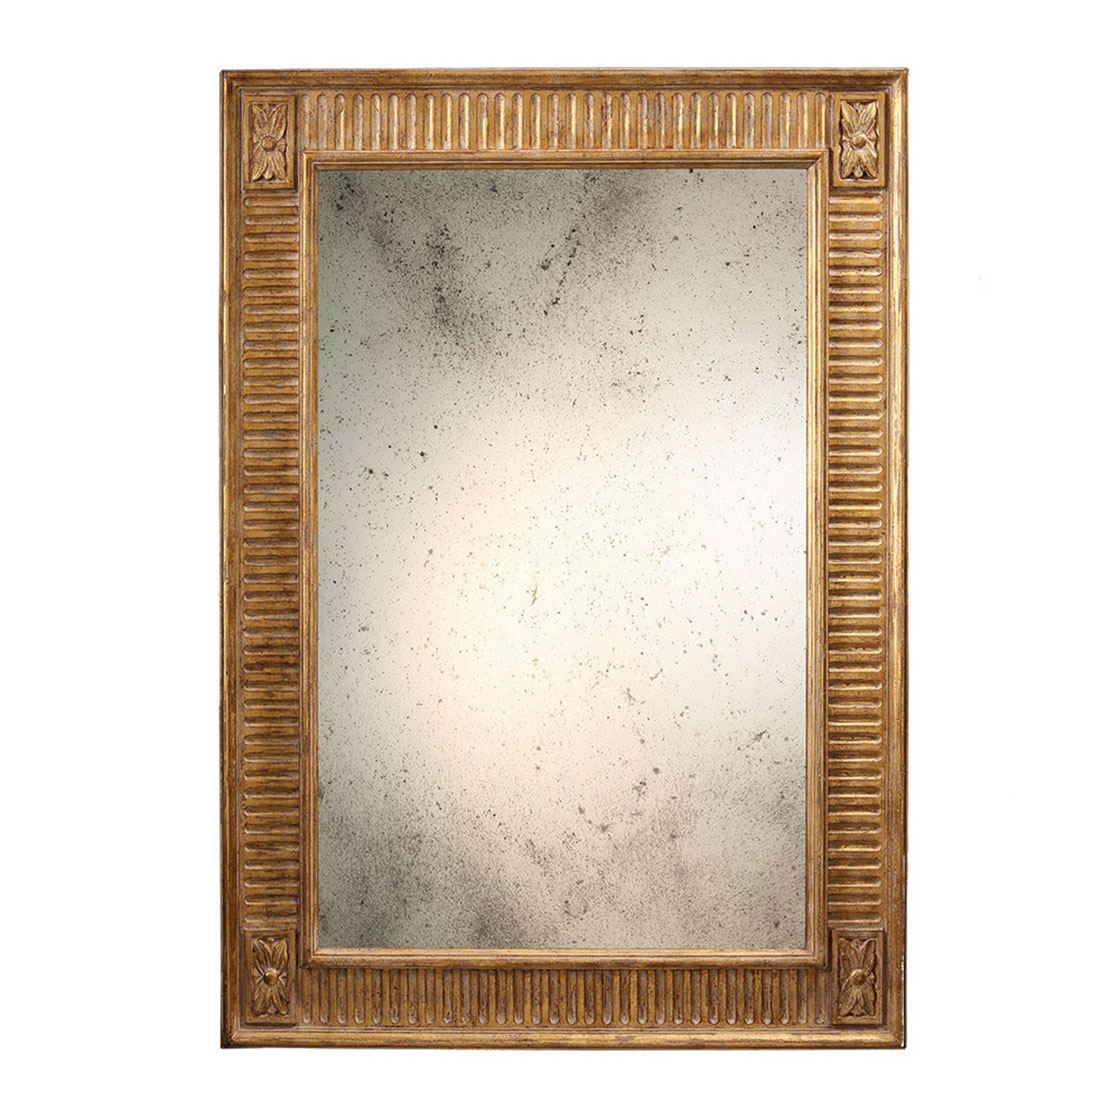 Fluted mirror in Distressed gold - Beaumont & Fletcher